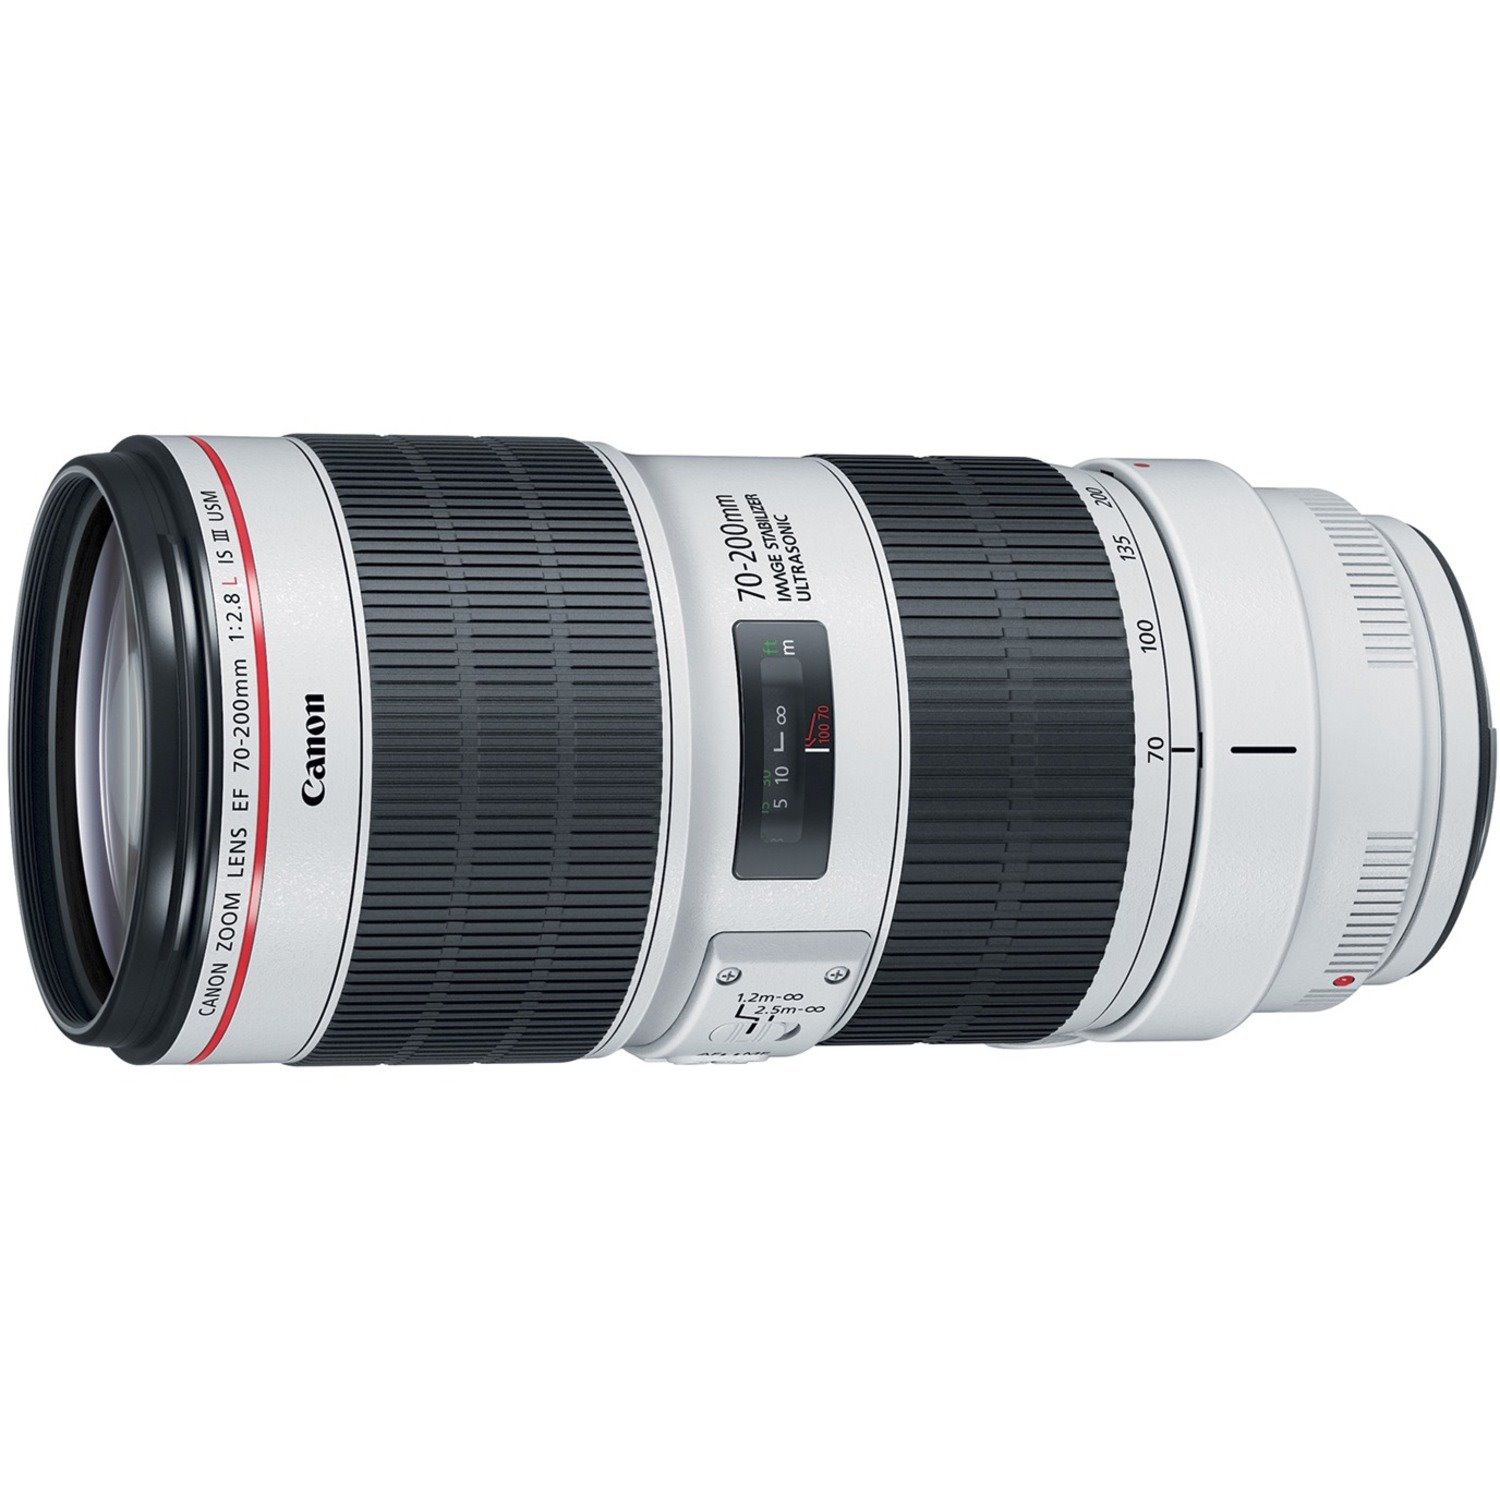 Canon - 70 mm to 200 mmf/2.8 - Telephoto Zoom Lens for Canon EF